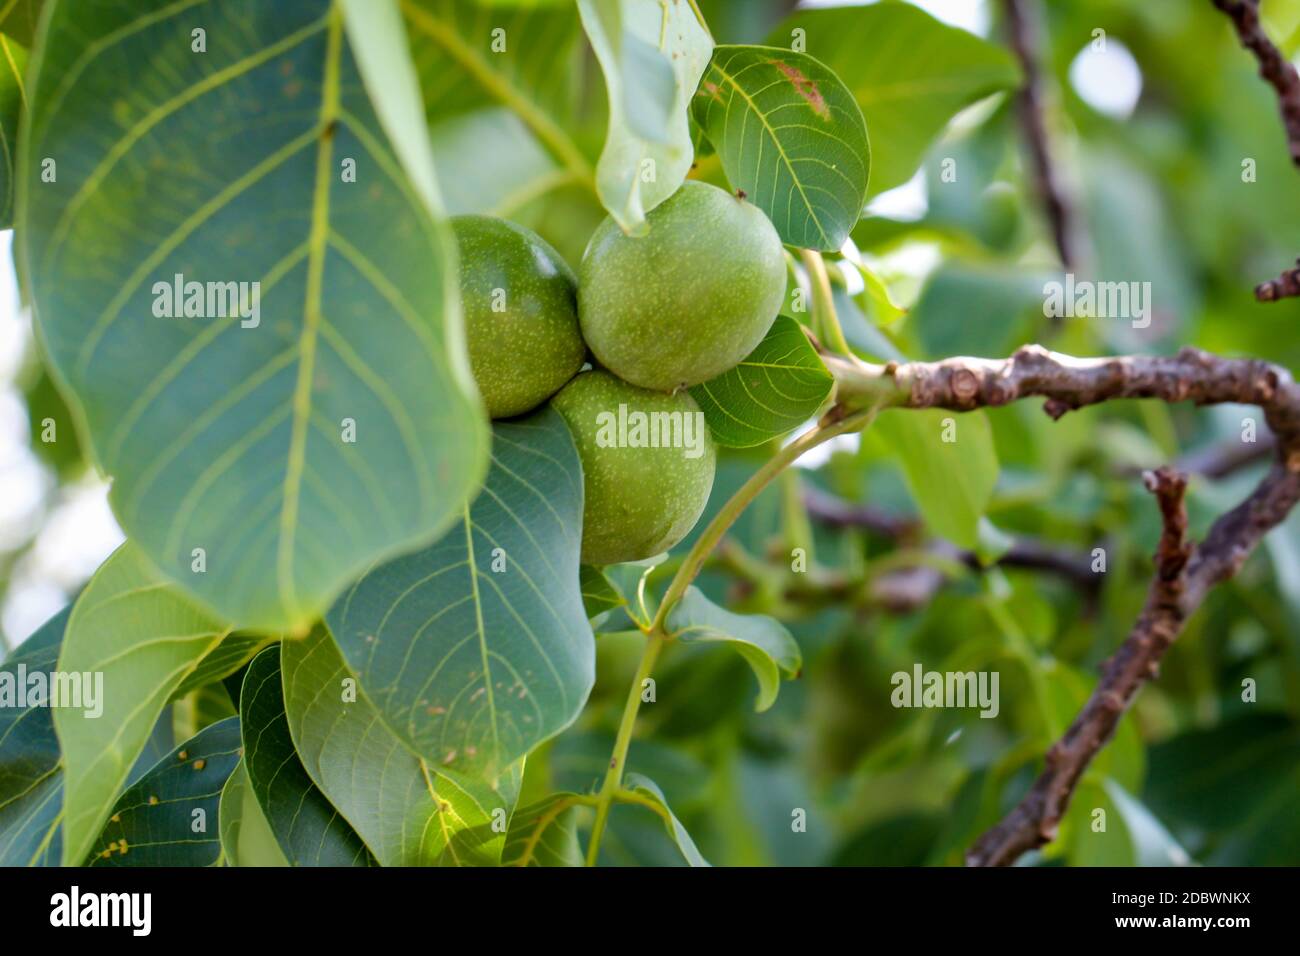 Three walnuts in their green coating hanging on the tree. Stock Photo